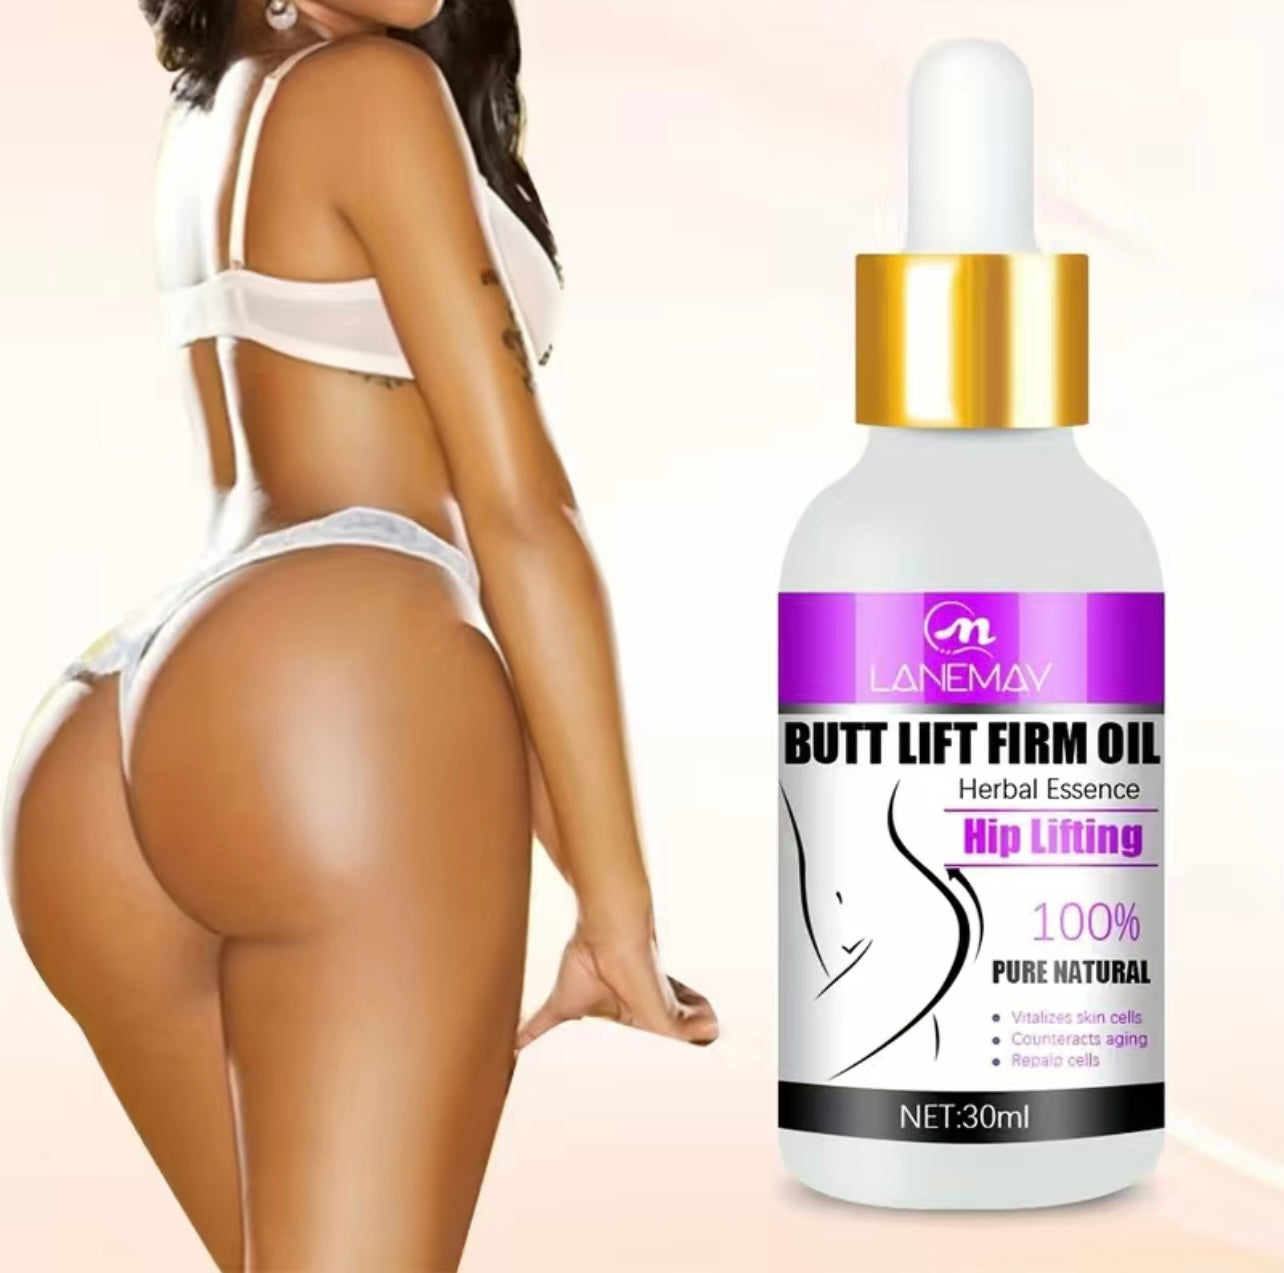 All Natural Butt Lifting, Firming and Plumping Body Oil.  some benefits of the product are cellulite smoothing, increased skin elasticity, and skin firming. The product also stimulates collagen production for a firmer, fuller buttocks. This Product can produce up to a 20% volume increase in the buttocks and hips with extended use. TikTok Viral Best Selling Item 